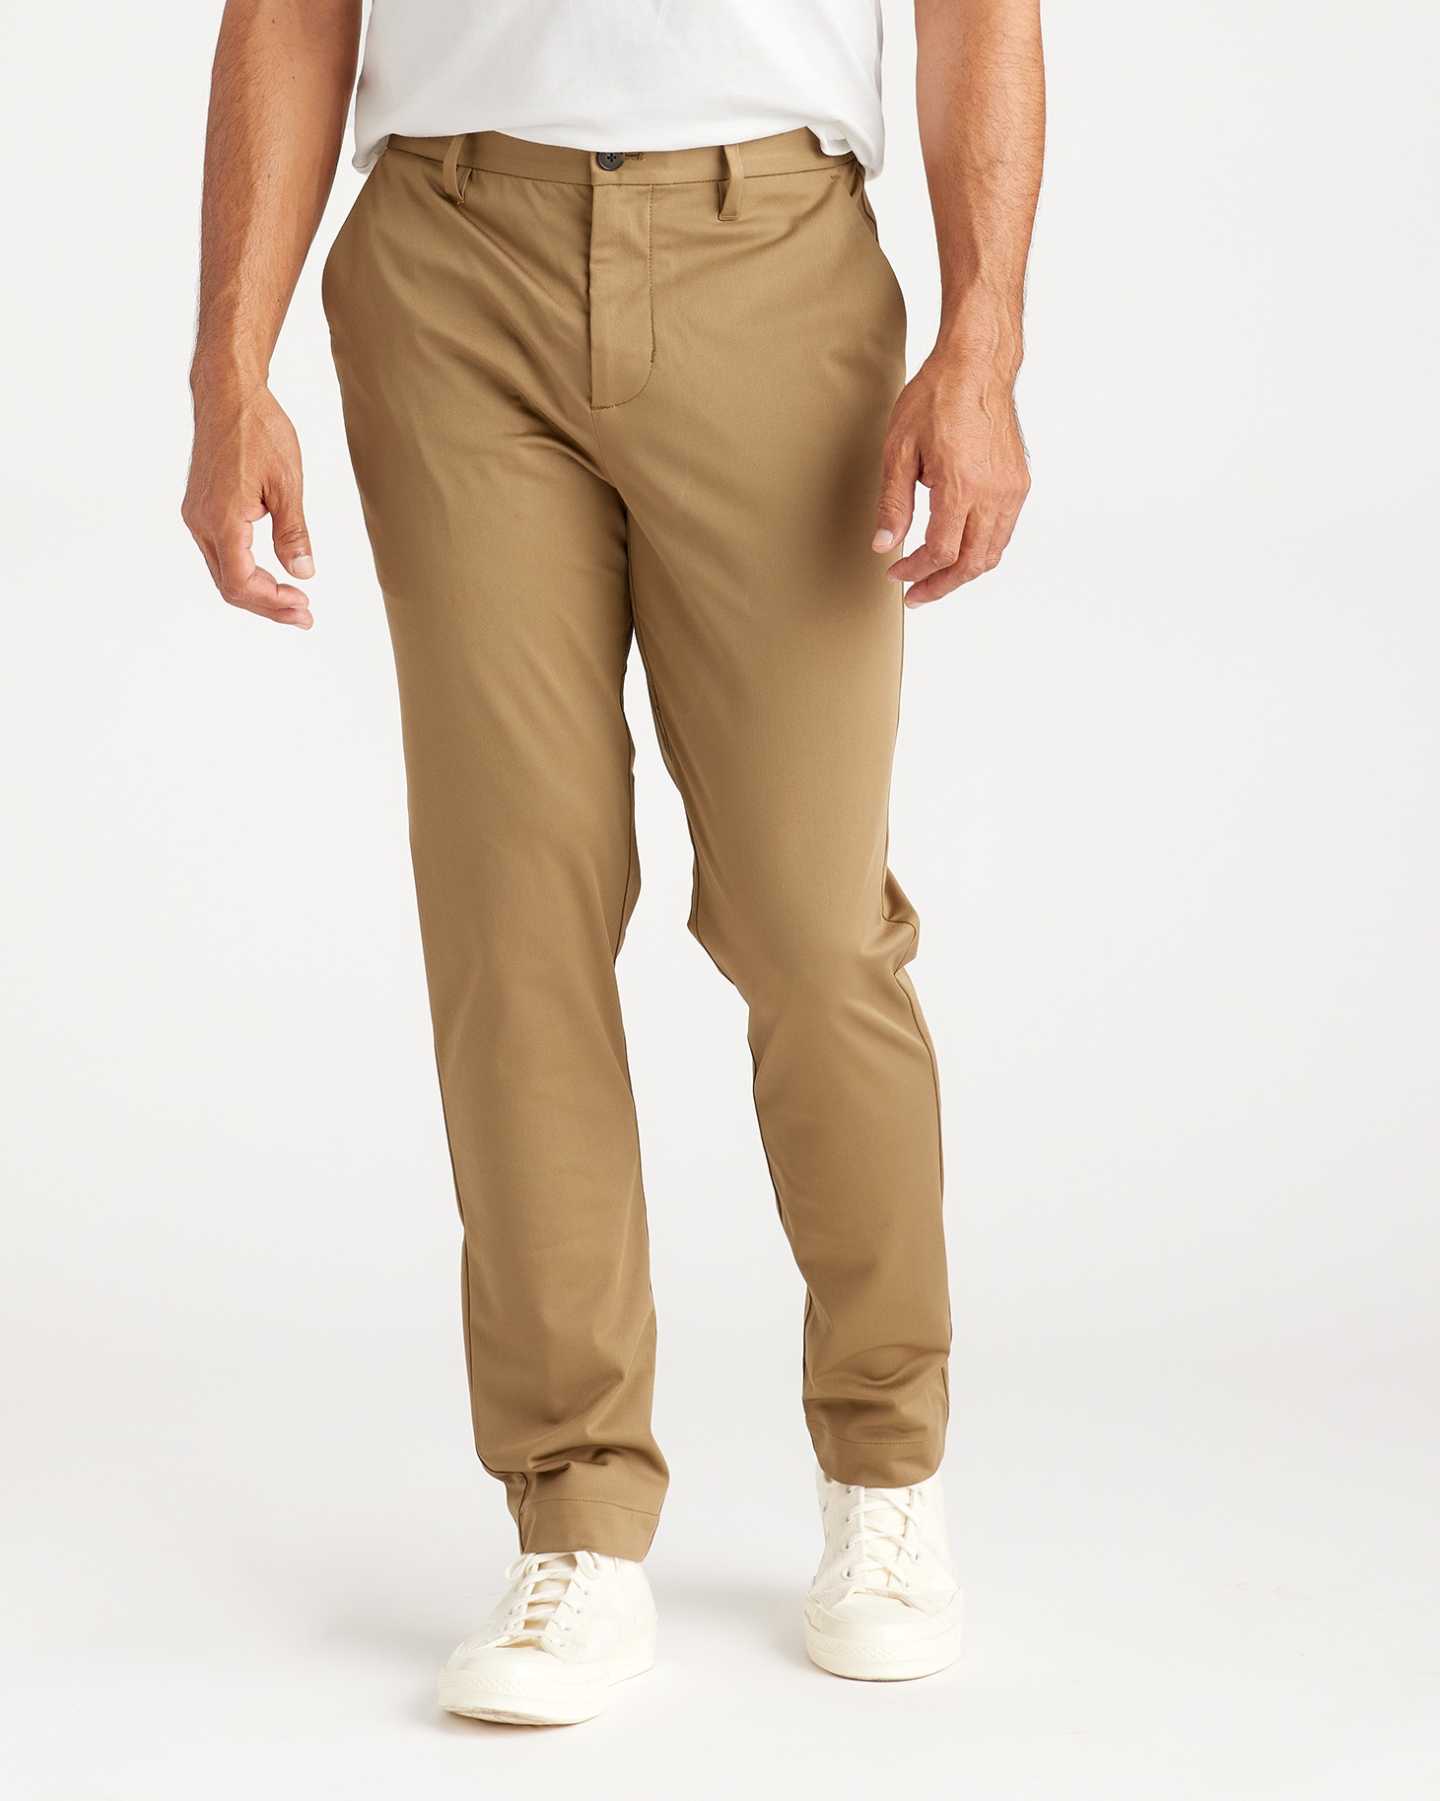 Pair With - Recycled Comfort Tech Chino - Light Khaki